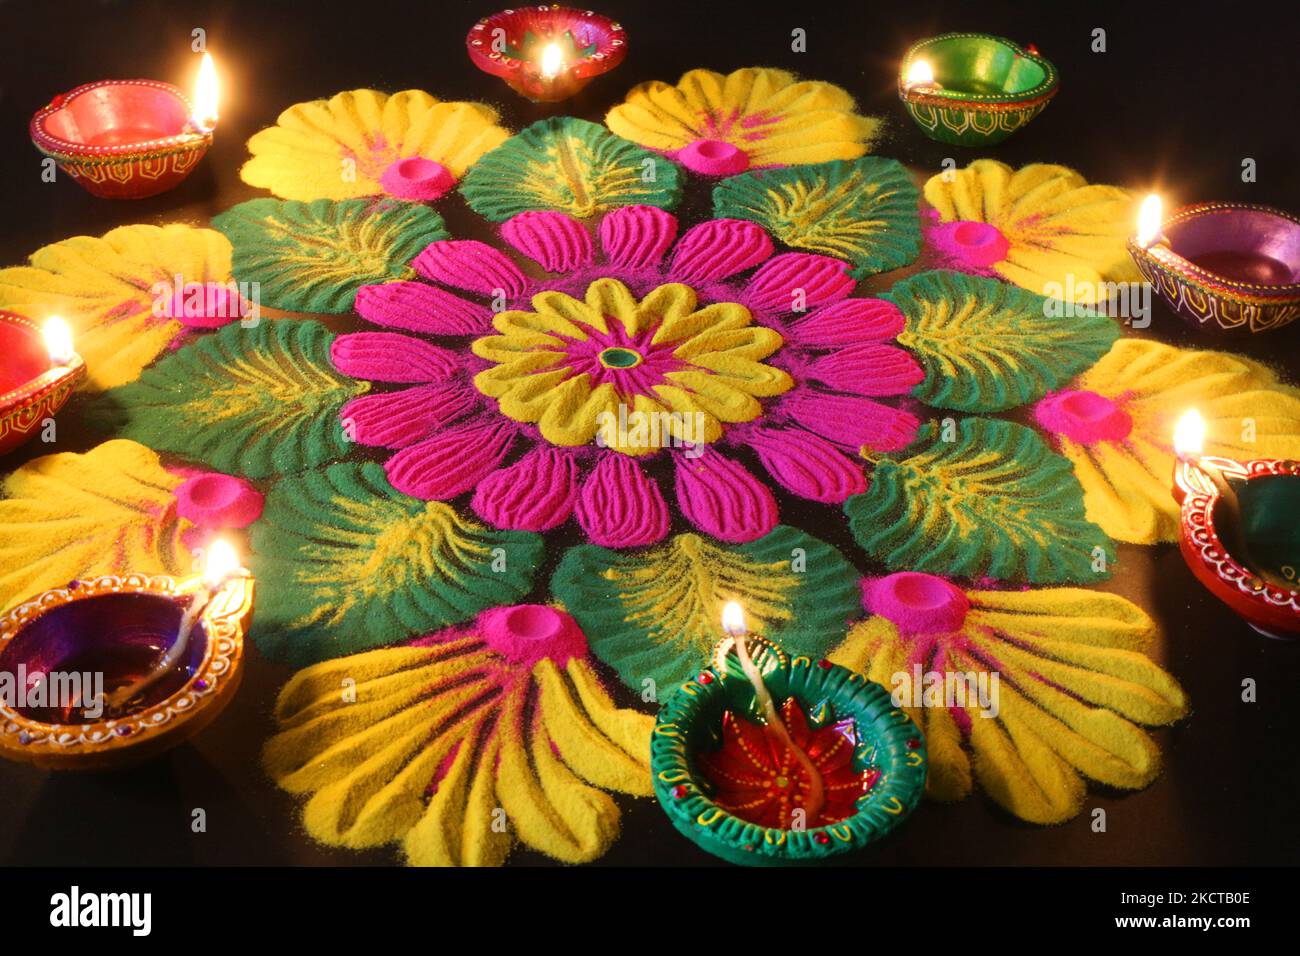 Diyas (small clay lamps) by a colourful rangloli design that was created using coloured powder during the festival of Diwali at a Hindu temple in Toronto, Ontario, Canada, on November 04, 2021. Rangoli is a traditional design drawn on the ground with colored powder, often in front of homes or temples. (Photo by Creative Touch Imaging Ltd./NurPhoto) Stock Photo